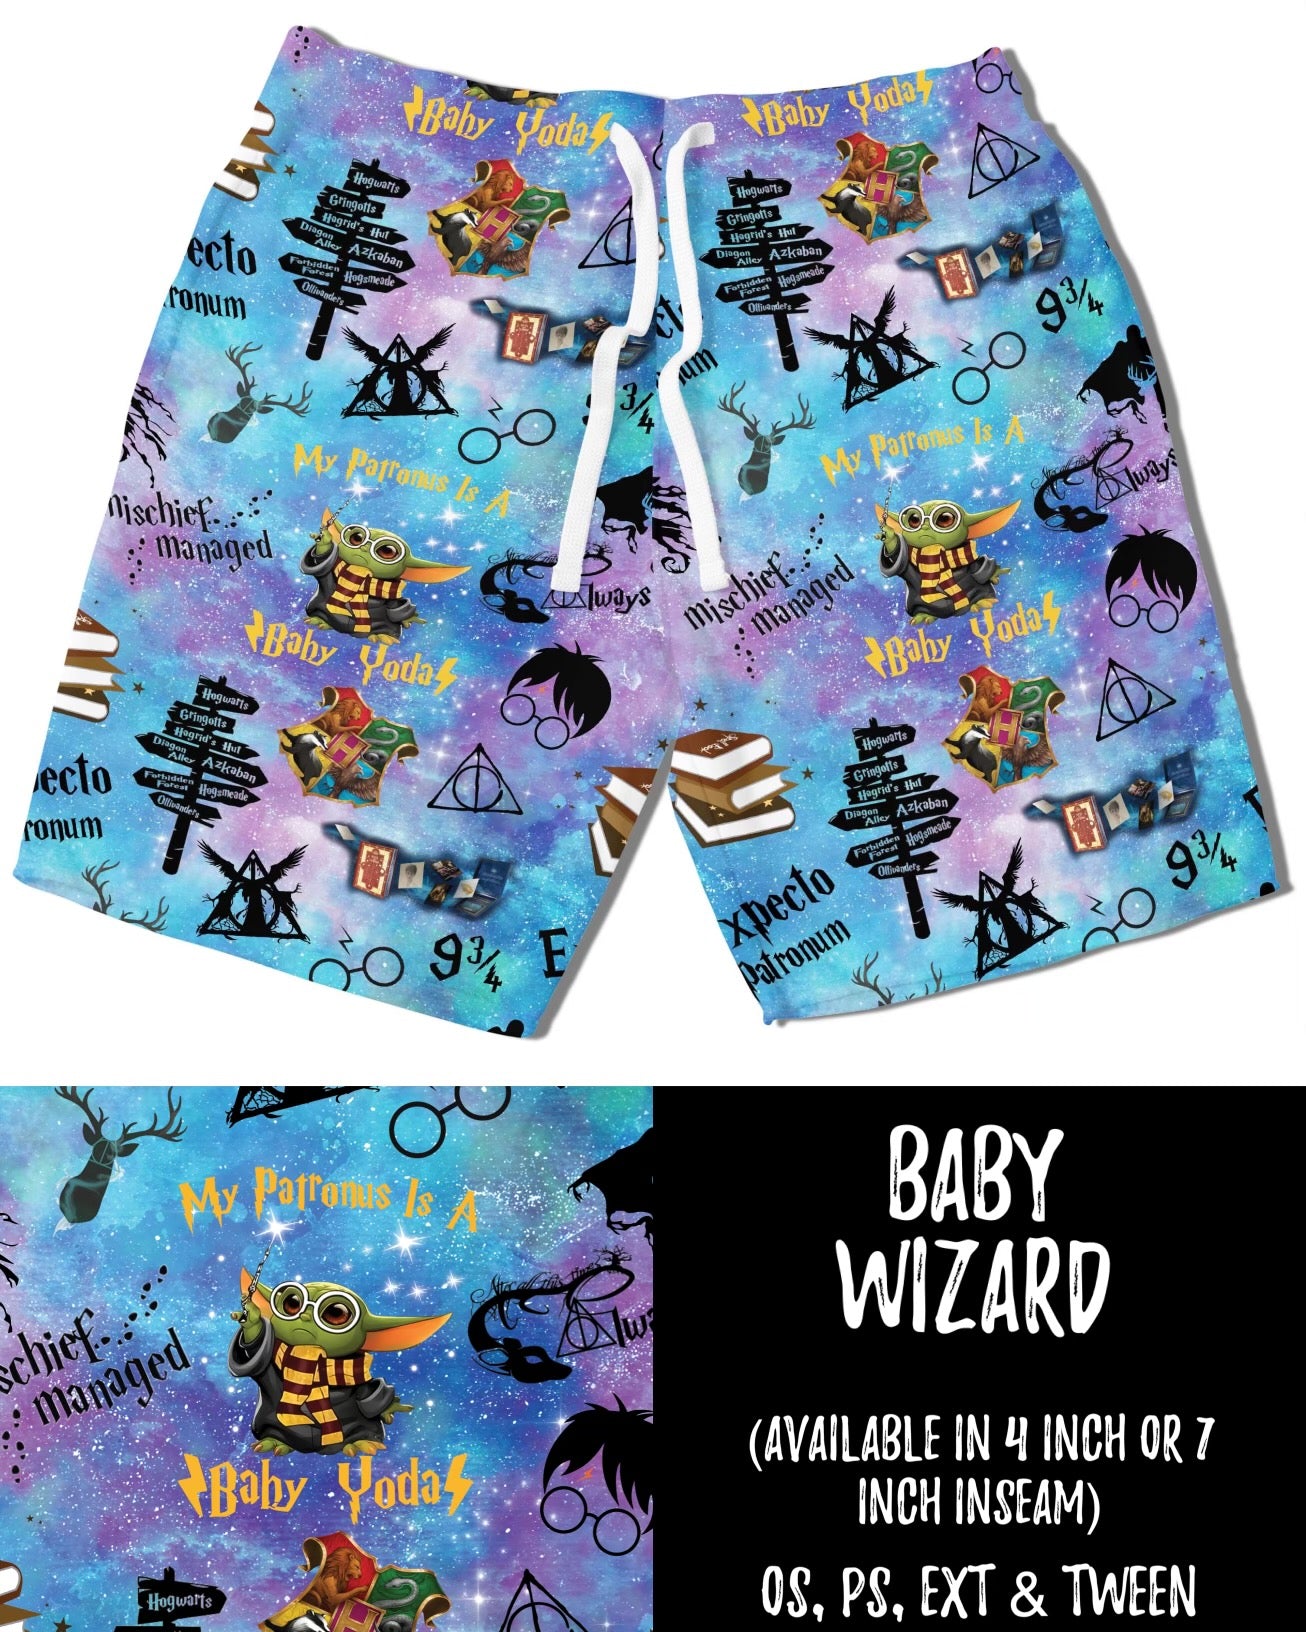 Baby Wizard SHORTS (4 INCH AND 7 INCH)